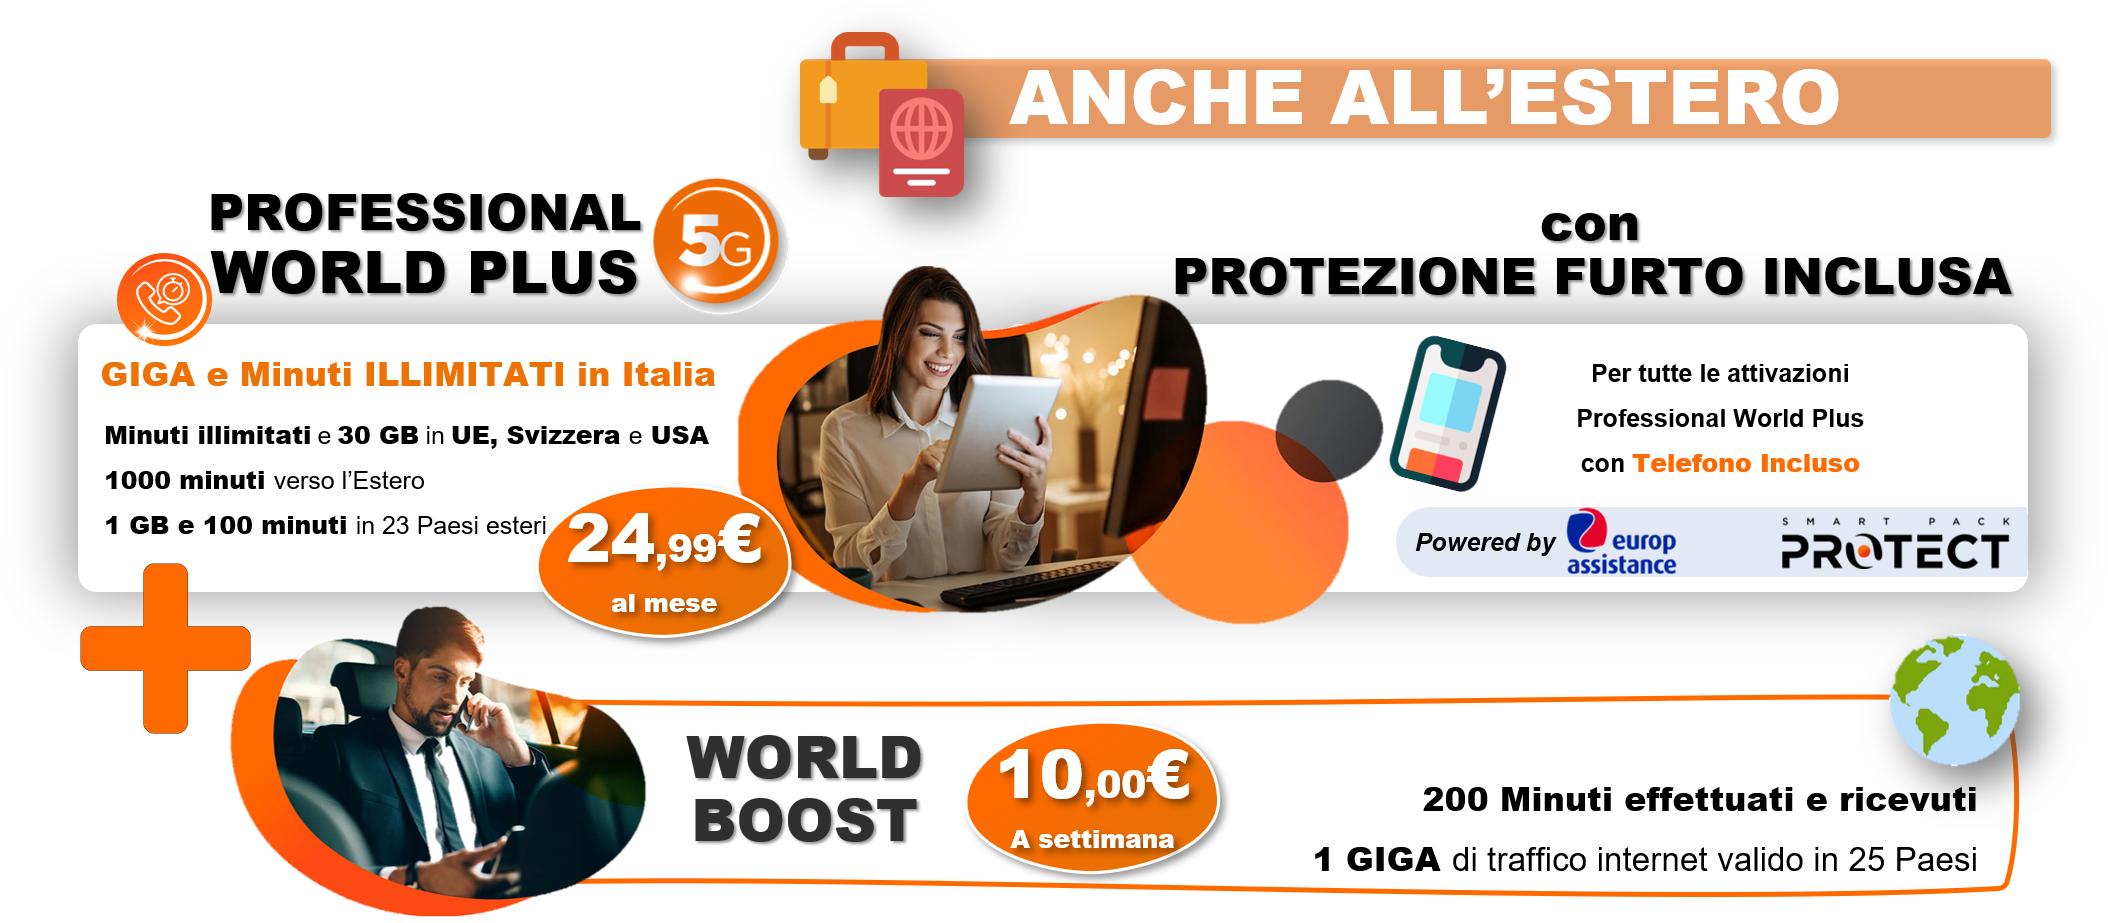 PROFESSIONAL WORLD PLUS CON SMARTPACK PROTECT 5G